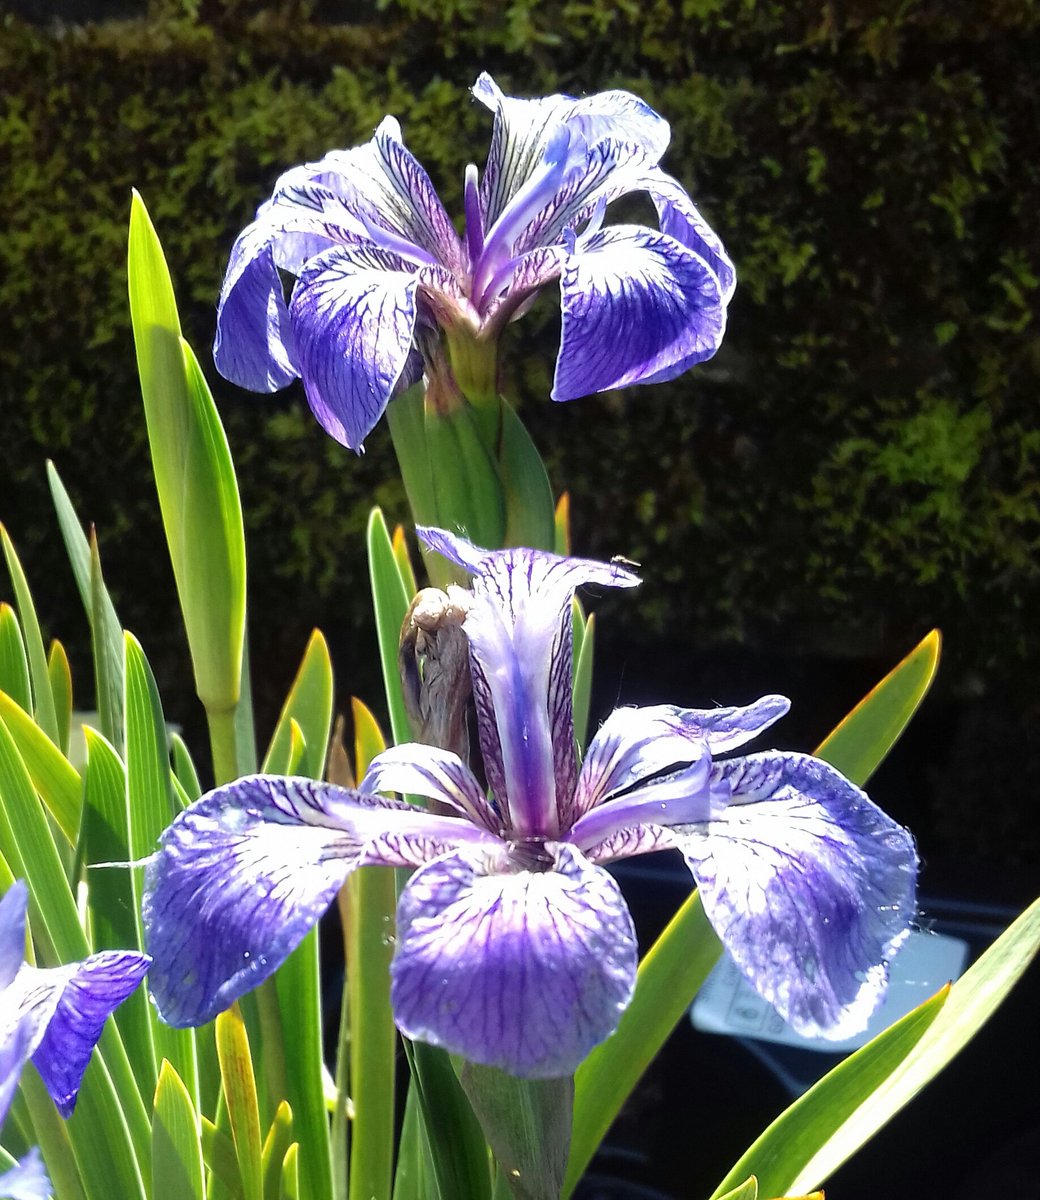 @GardensHour Good evening #GardensHour had a great bank holiday weekend and three sheets to the wind. For Q&A week my question is can you identify this variety of iris for me  please? It's awesome and sadly isn't mine. #gardenenvy